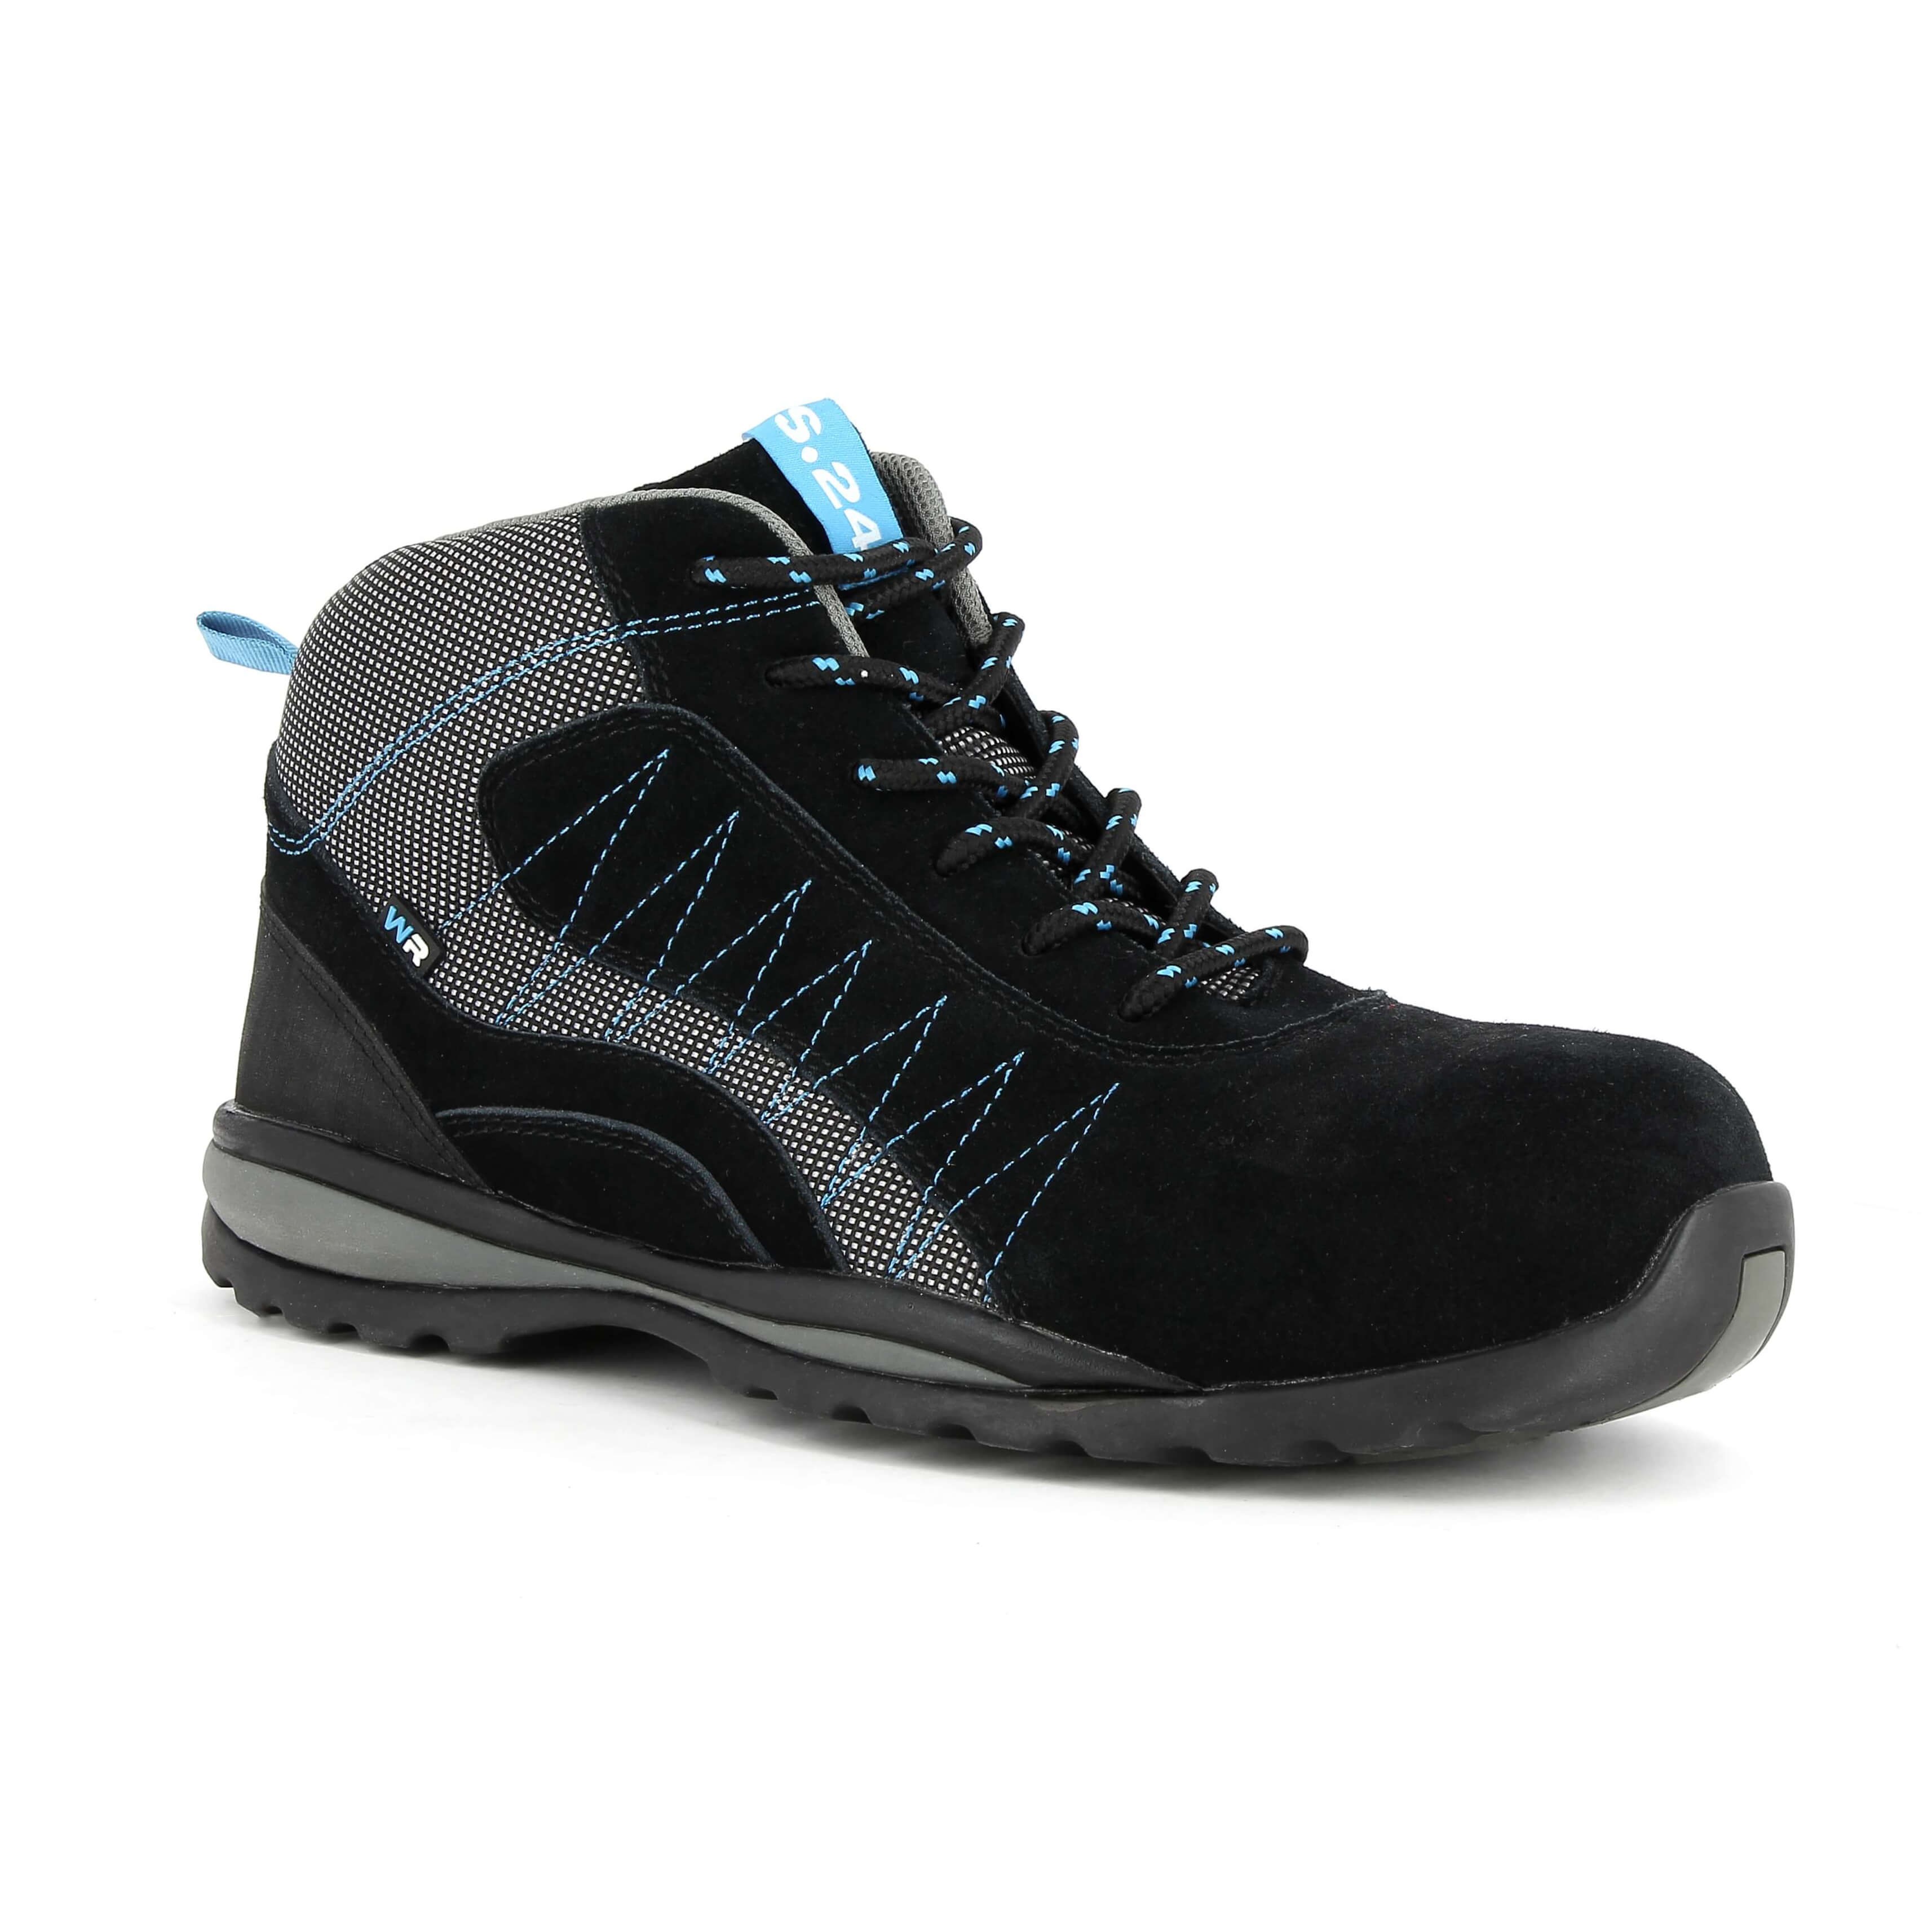 Chaussure securite montante Waimea s3 s24 Chaussures-pro.fr